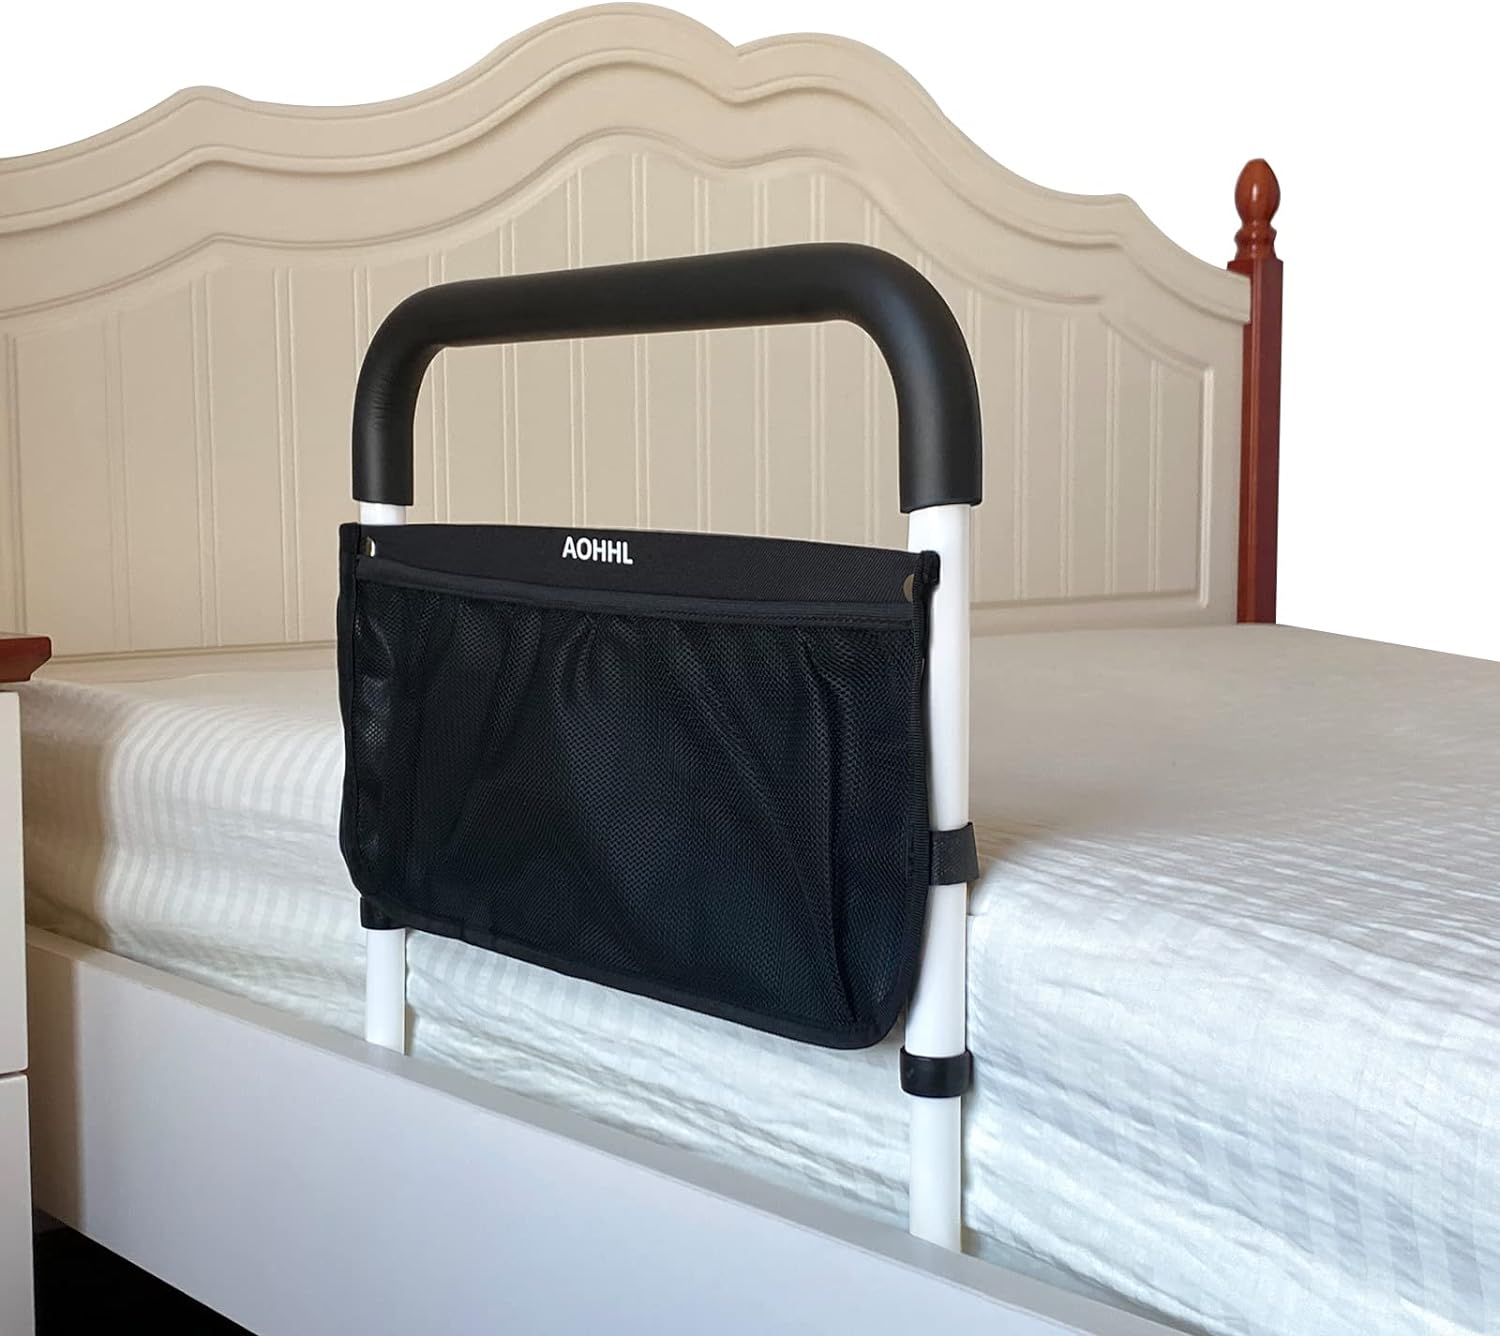 AOHHL Bed Rails for Elderly Adults Safety